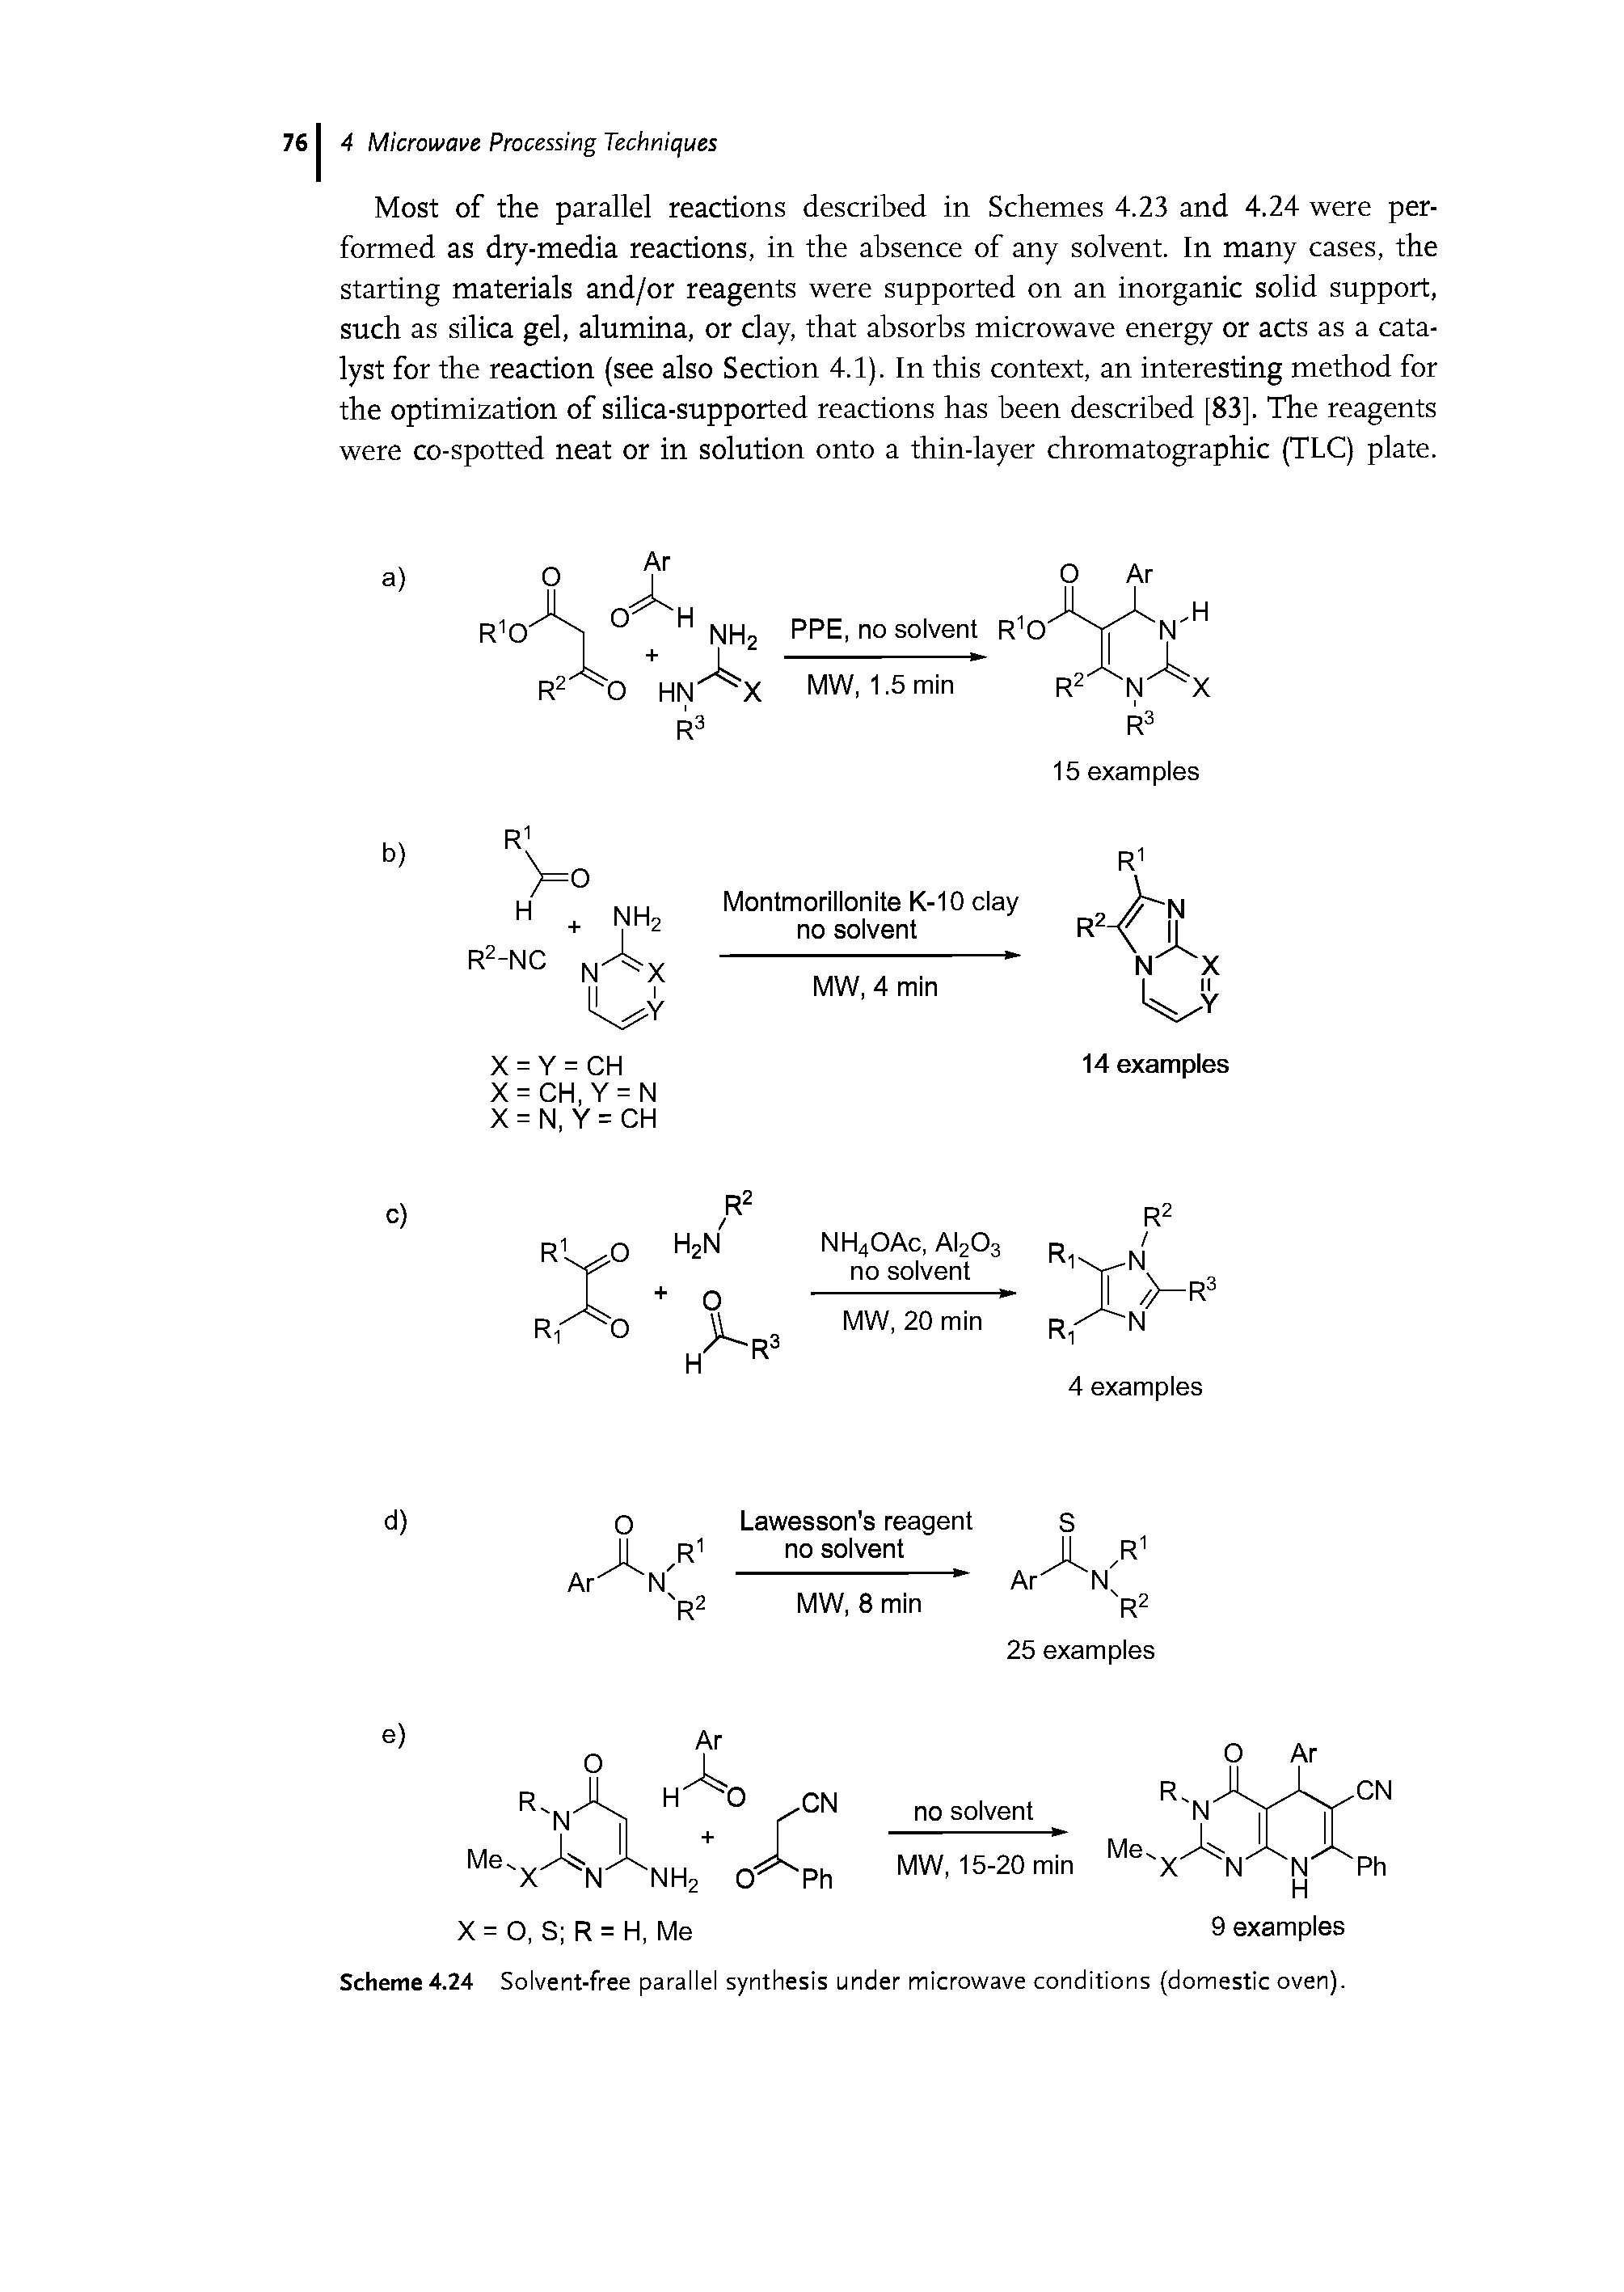 Scheme 4.24 Solvent-free parallel synthesis under microwave conditions (domestic oven).